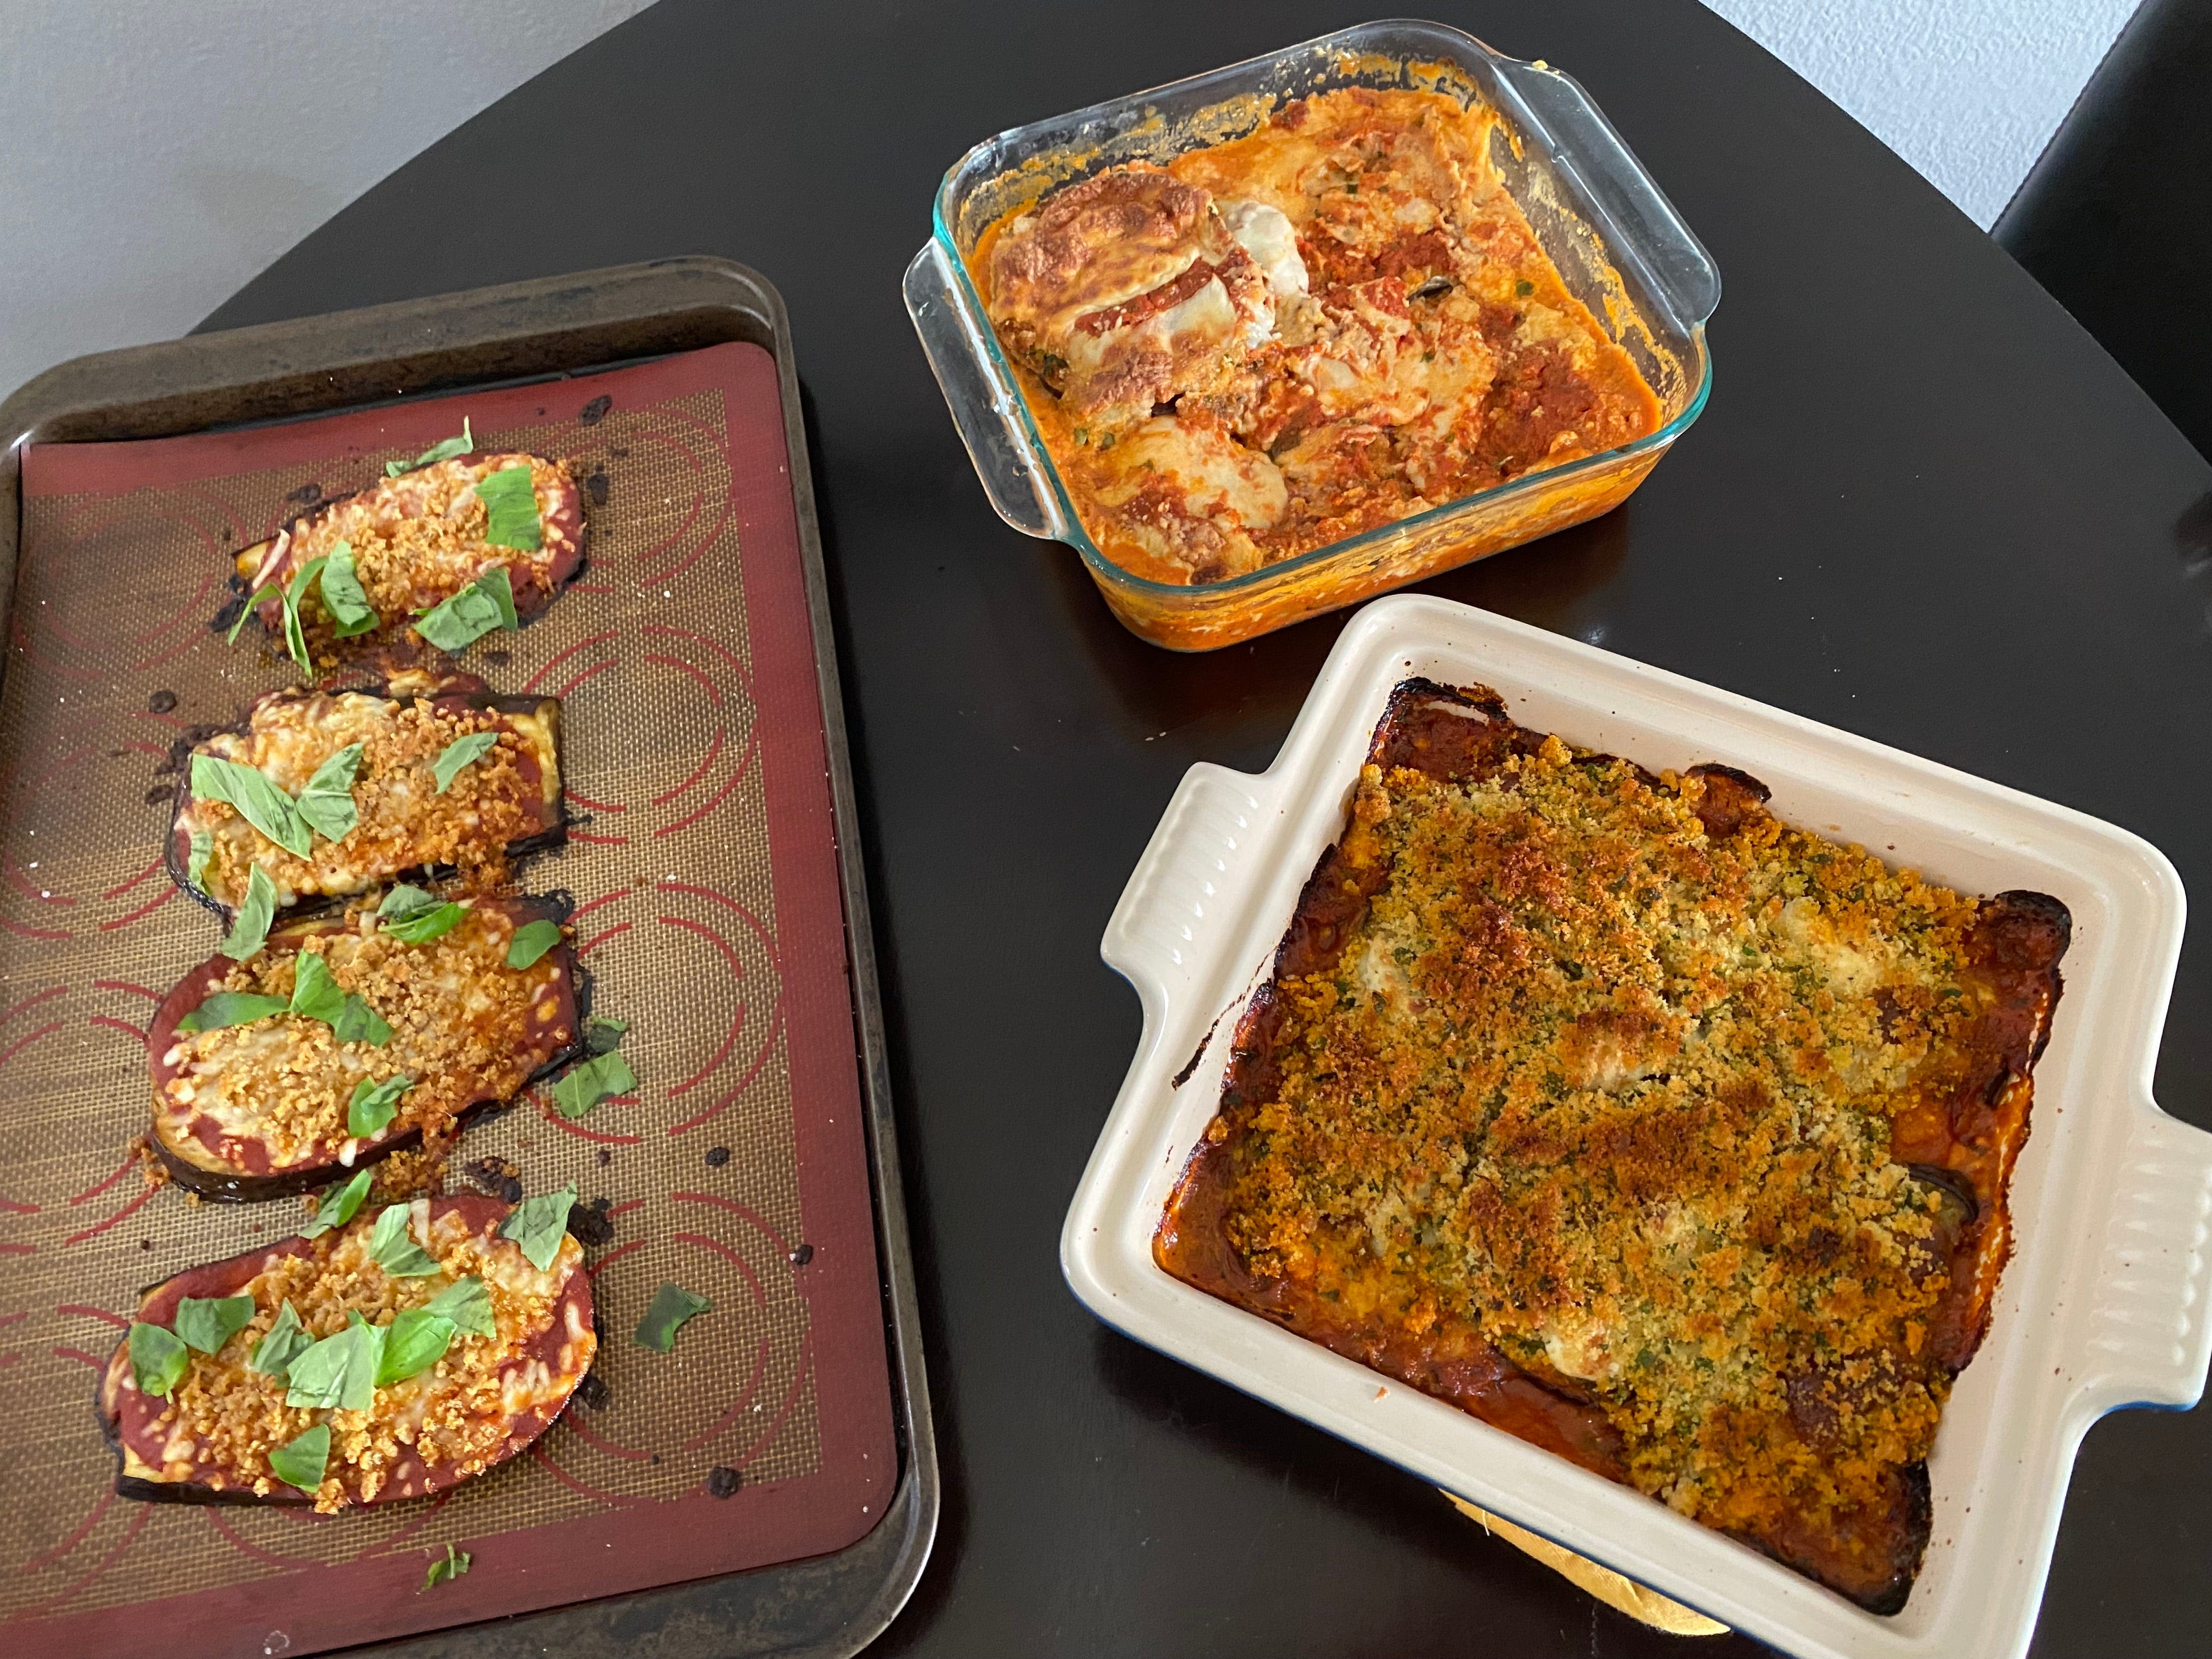 I made eggplant Parmesan using recipes from 3 celebrity chefs. The best one was worth the extra time and effort.